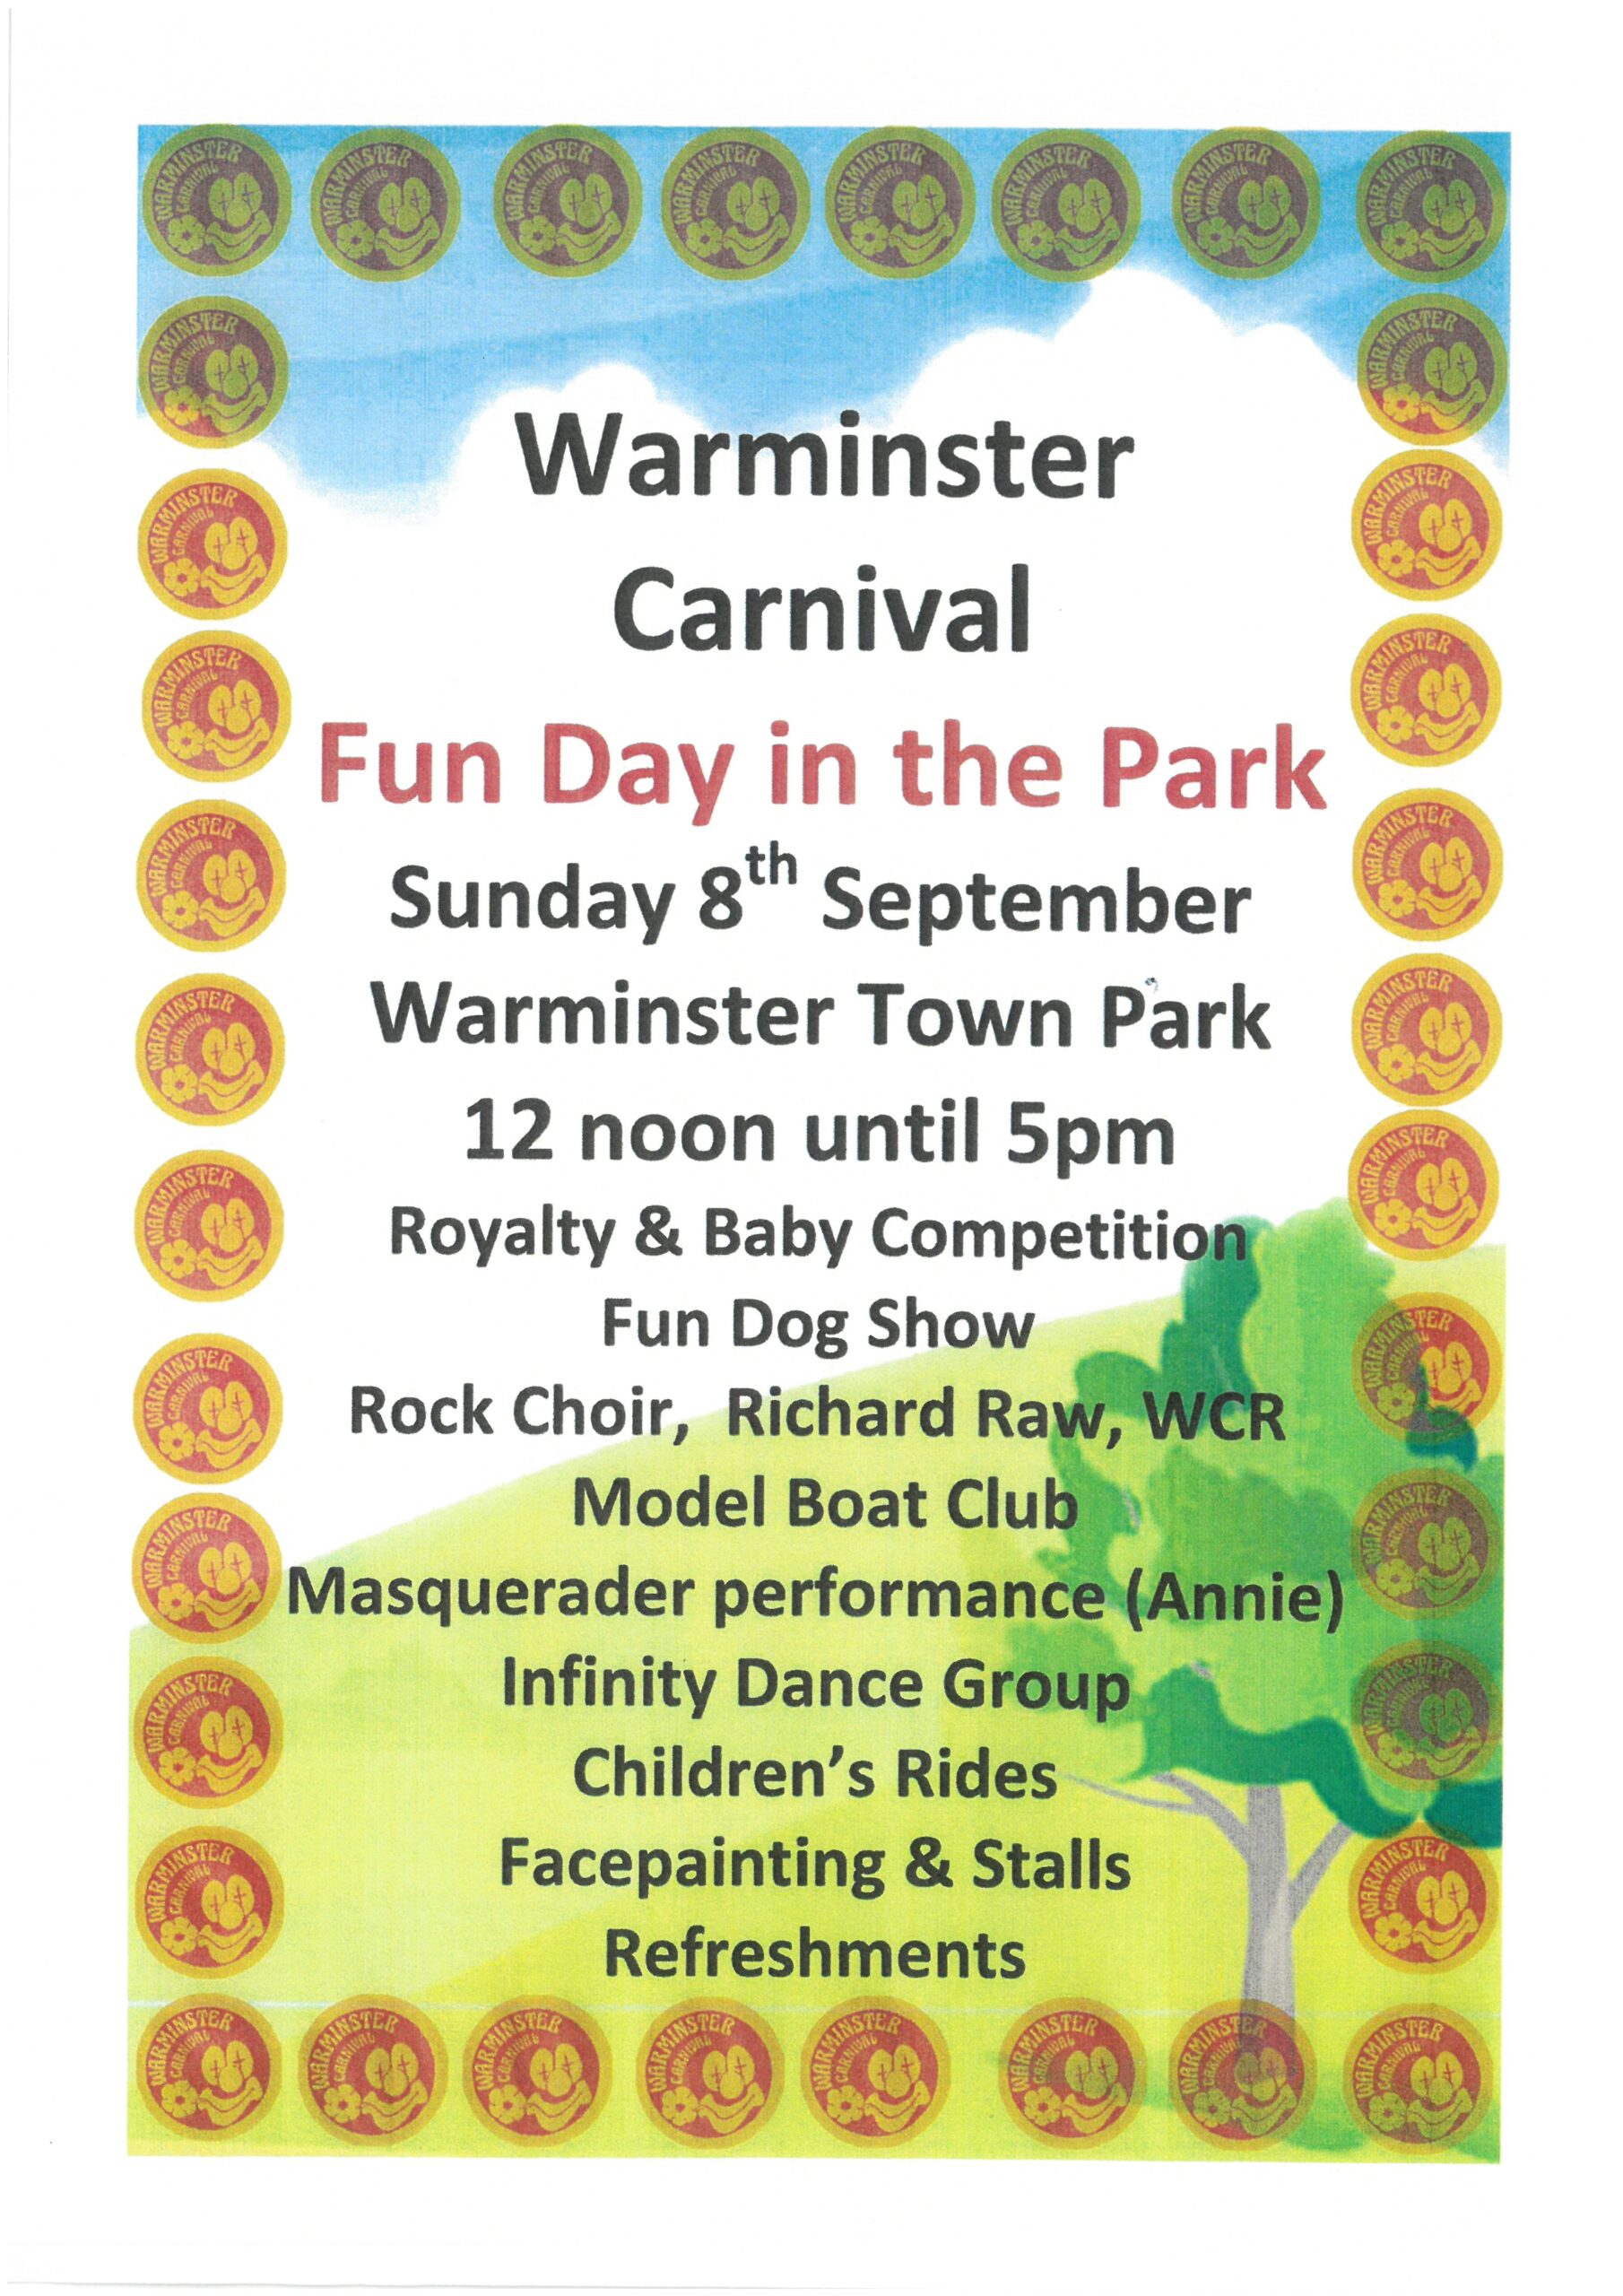 Warminster Carnival Fun Day in the Park